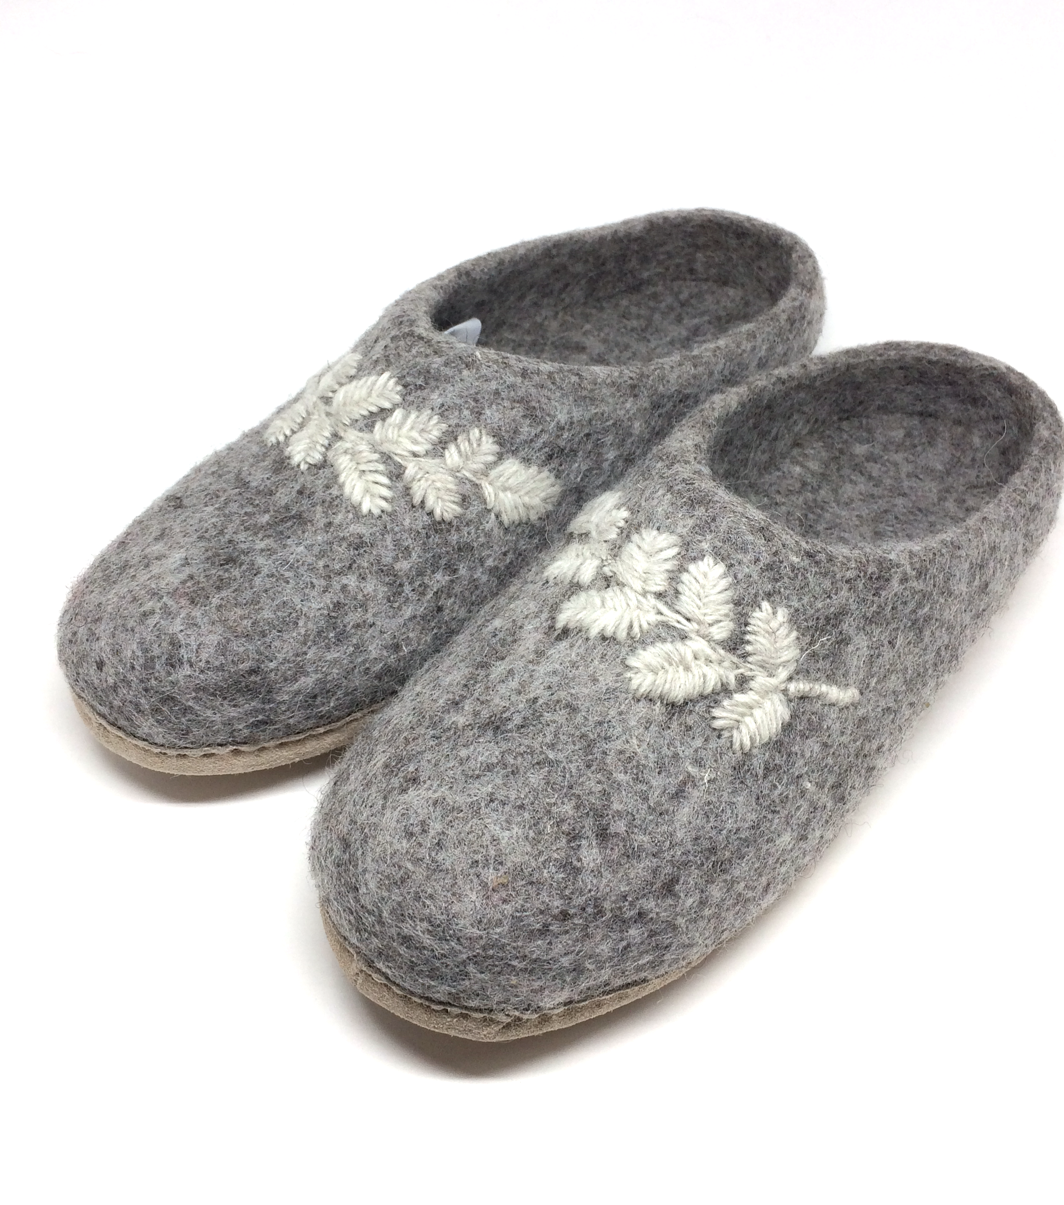 Adult & Youth Slippers